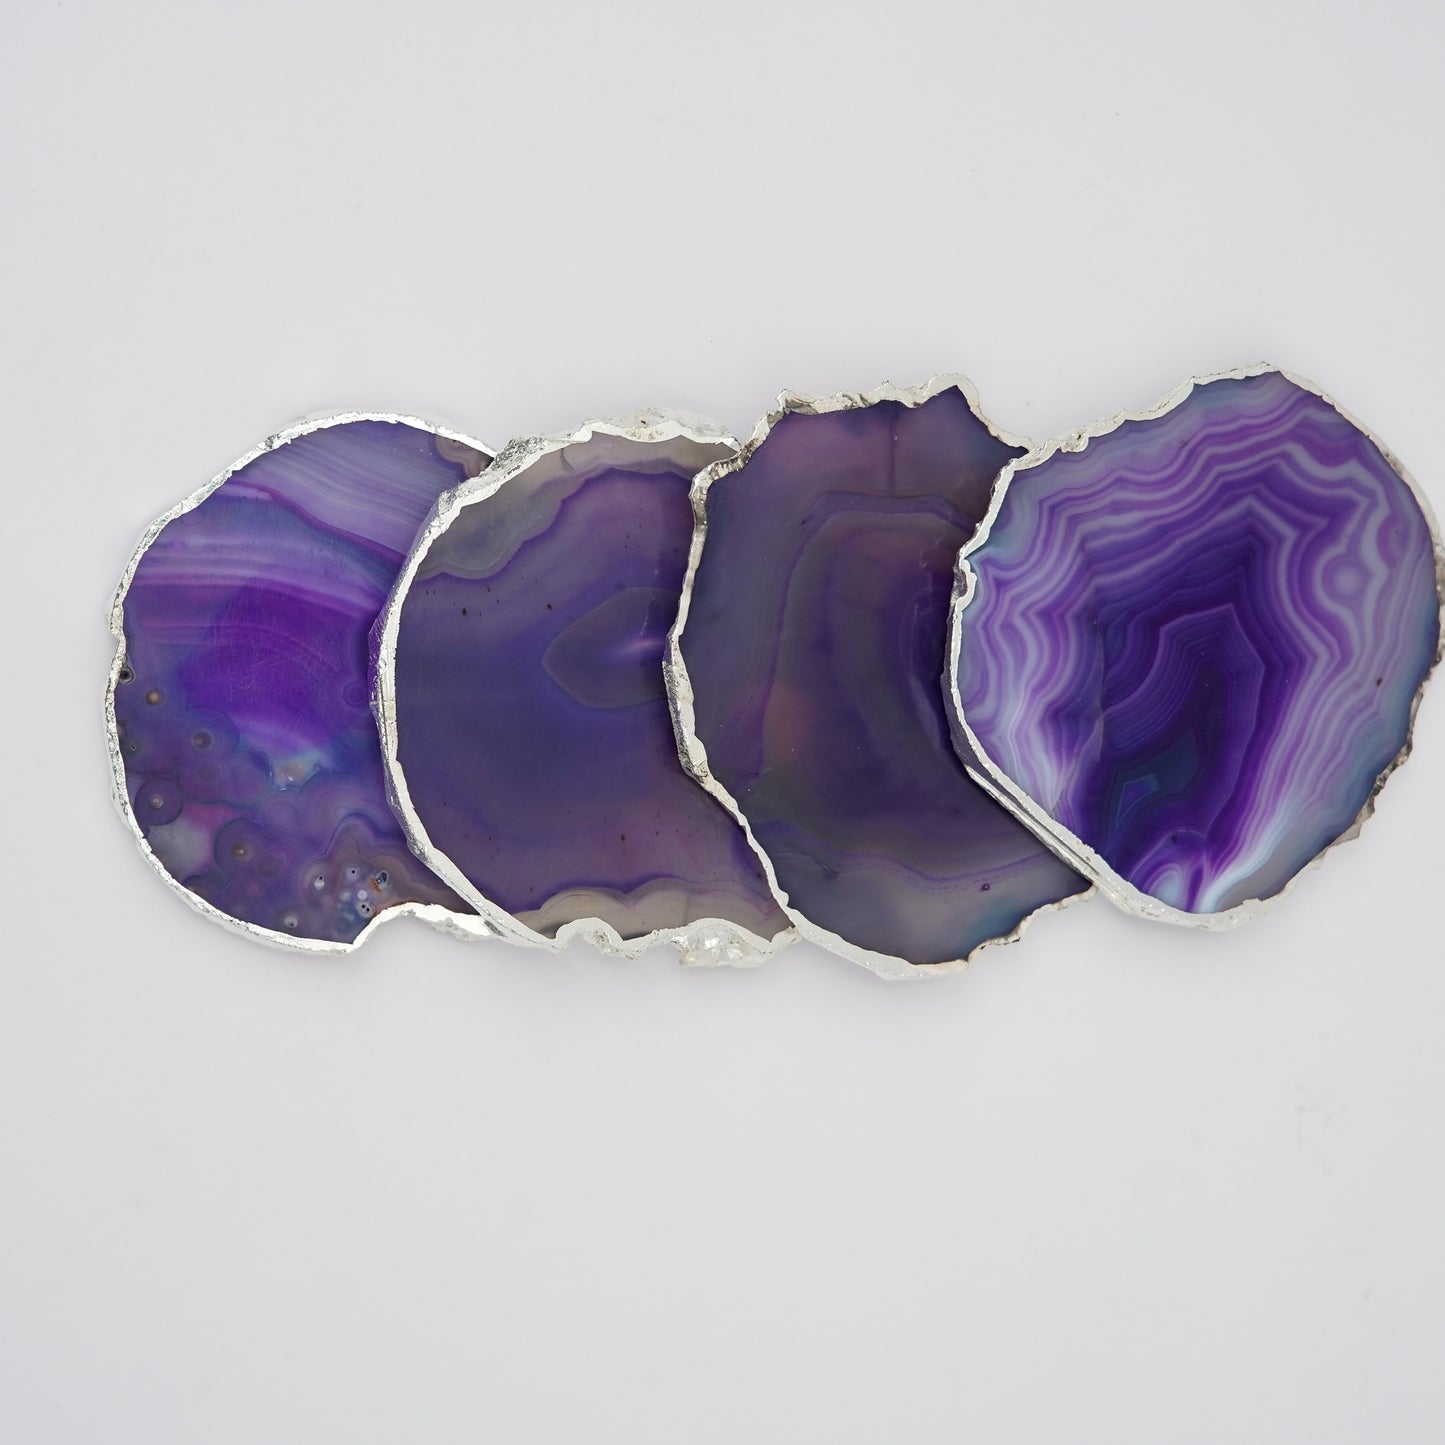 Brazilian Agate Stone Silver Plated Coaster Beautiful Coaster Fit for Tea Cups Coffee Mugs and Glasses Perfect Table Accessories Tableware Set of 4- Purple